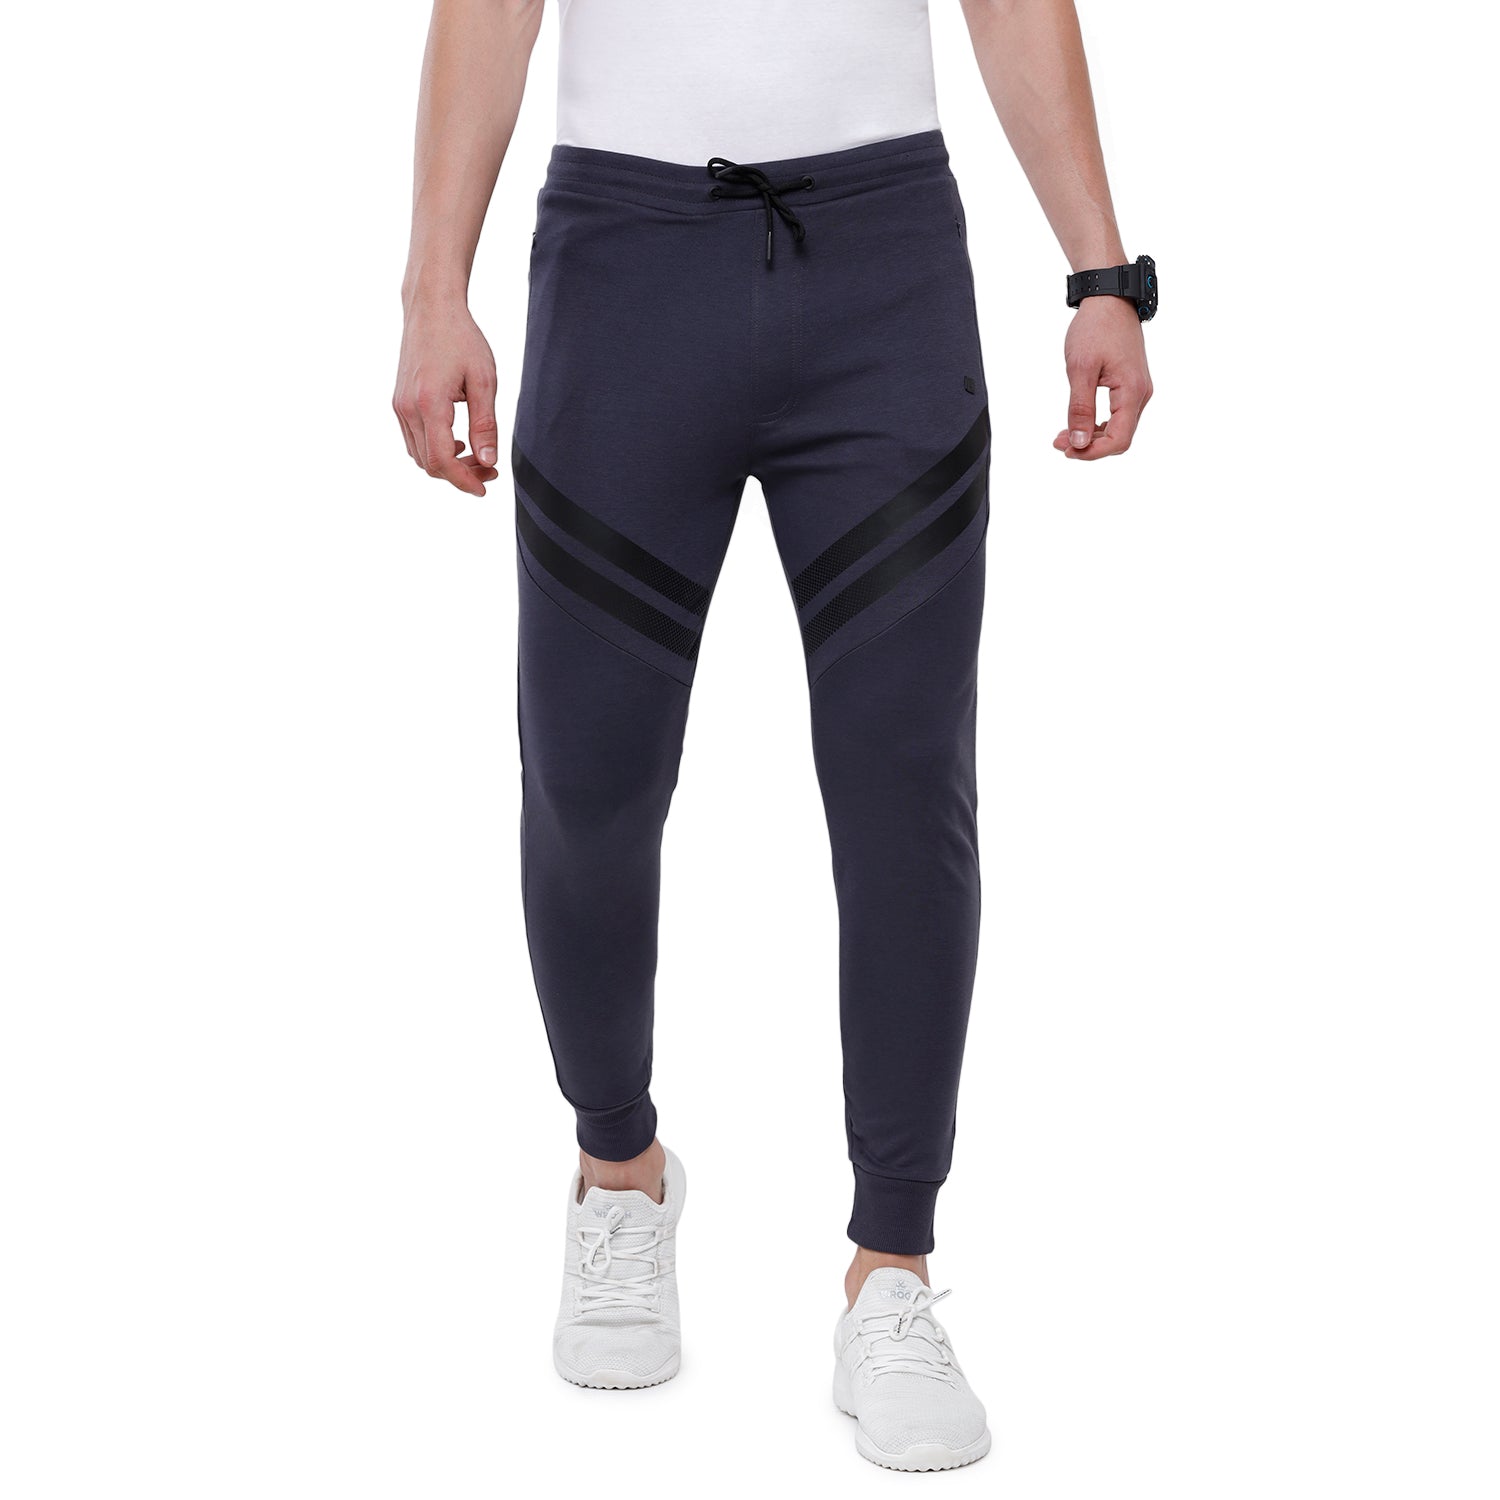 Classic Polo Men's India Ink Solid Mélange Slim Fit Comfy Jogger Pant - Gioz-06 A Track Pants Classic Polo 